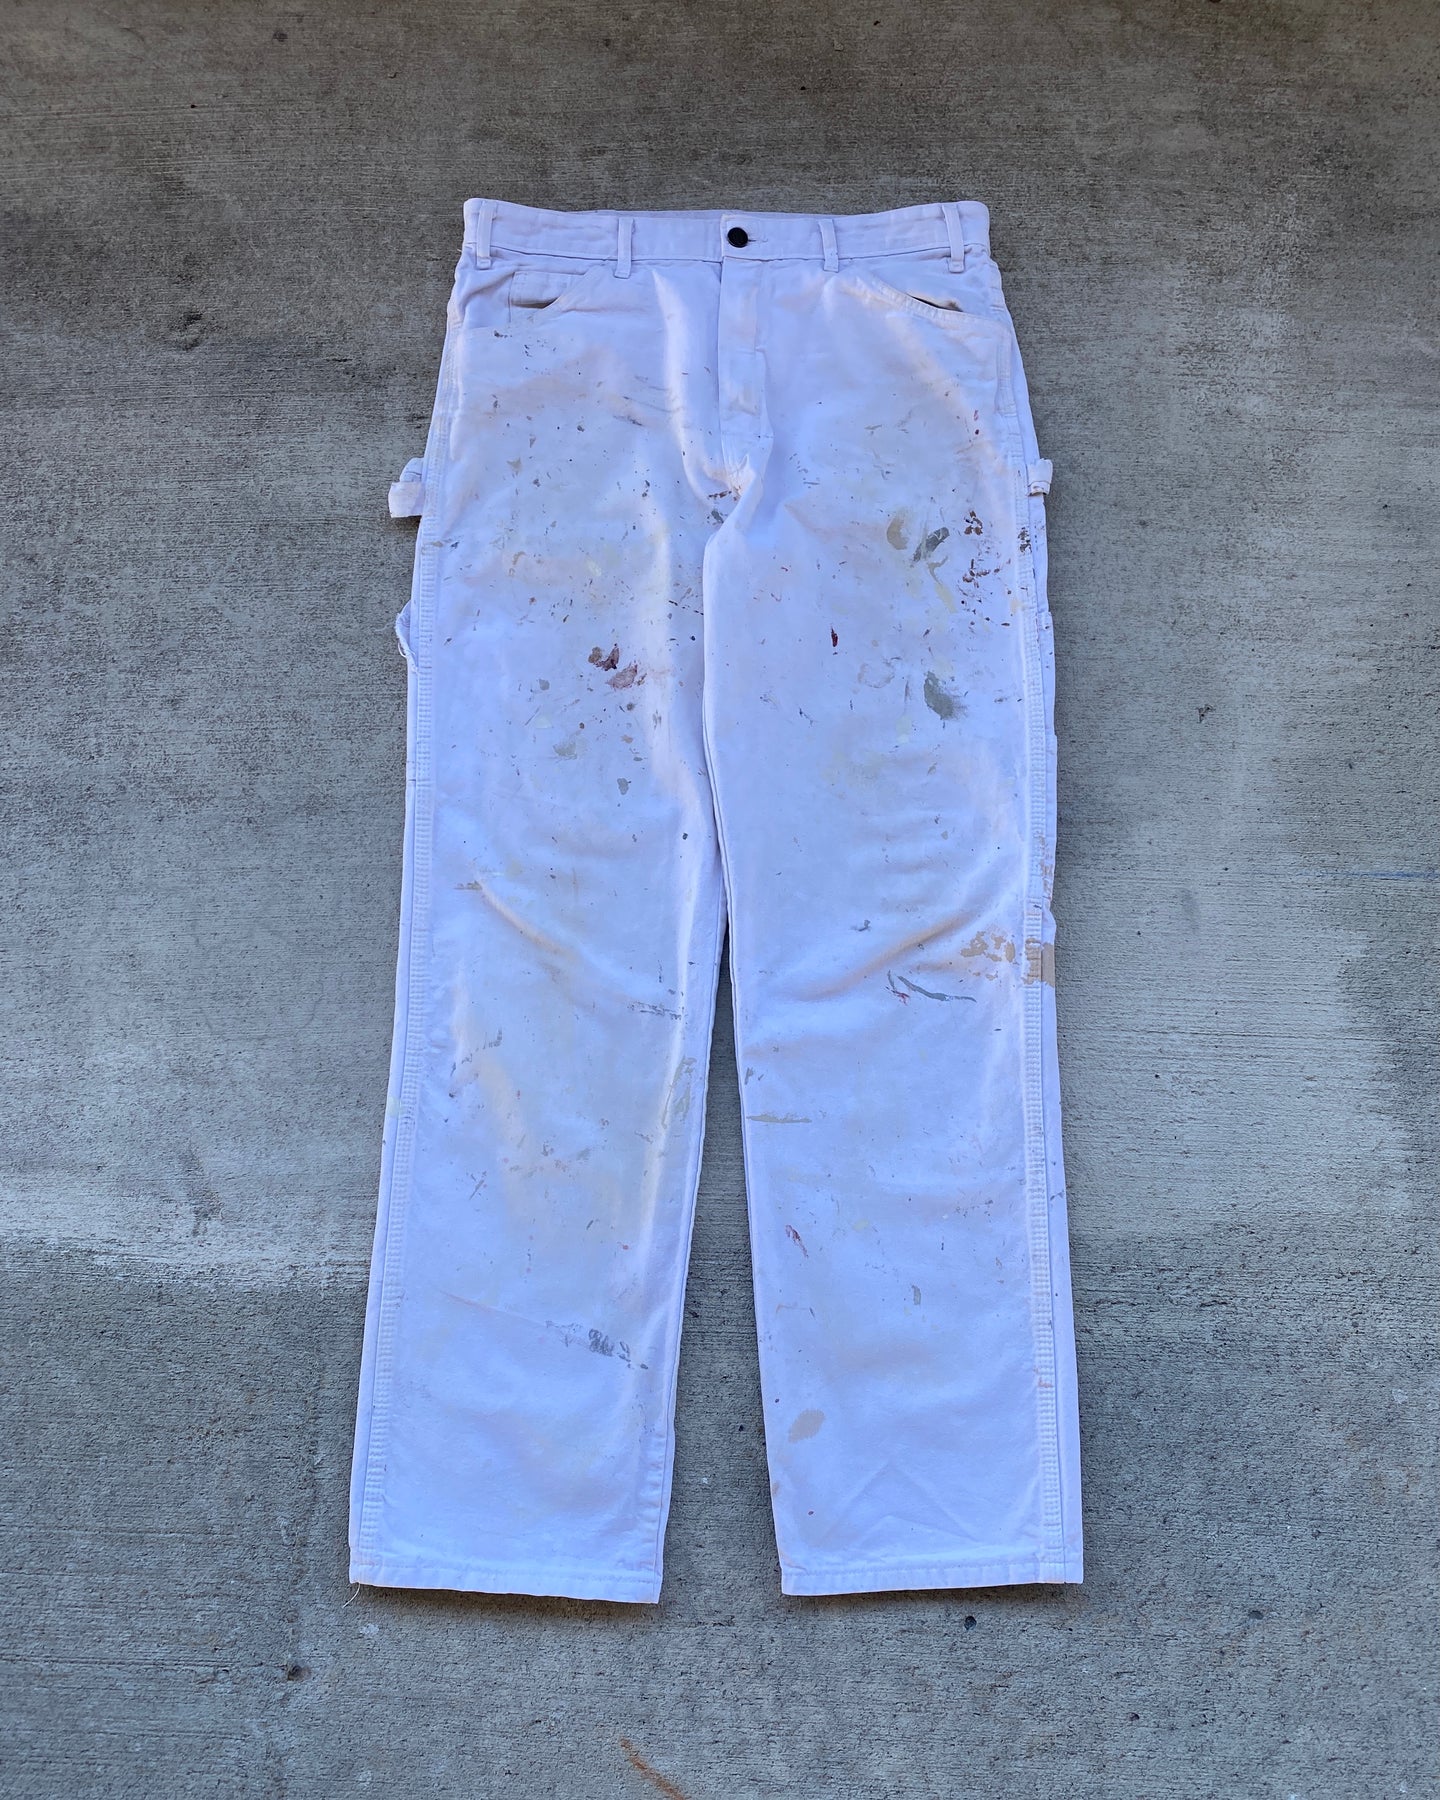 Dickies Distressed Painter's Pants - Size 34 x 32